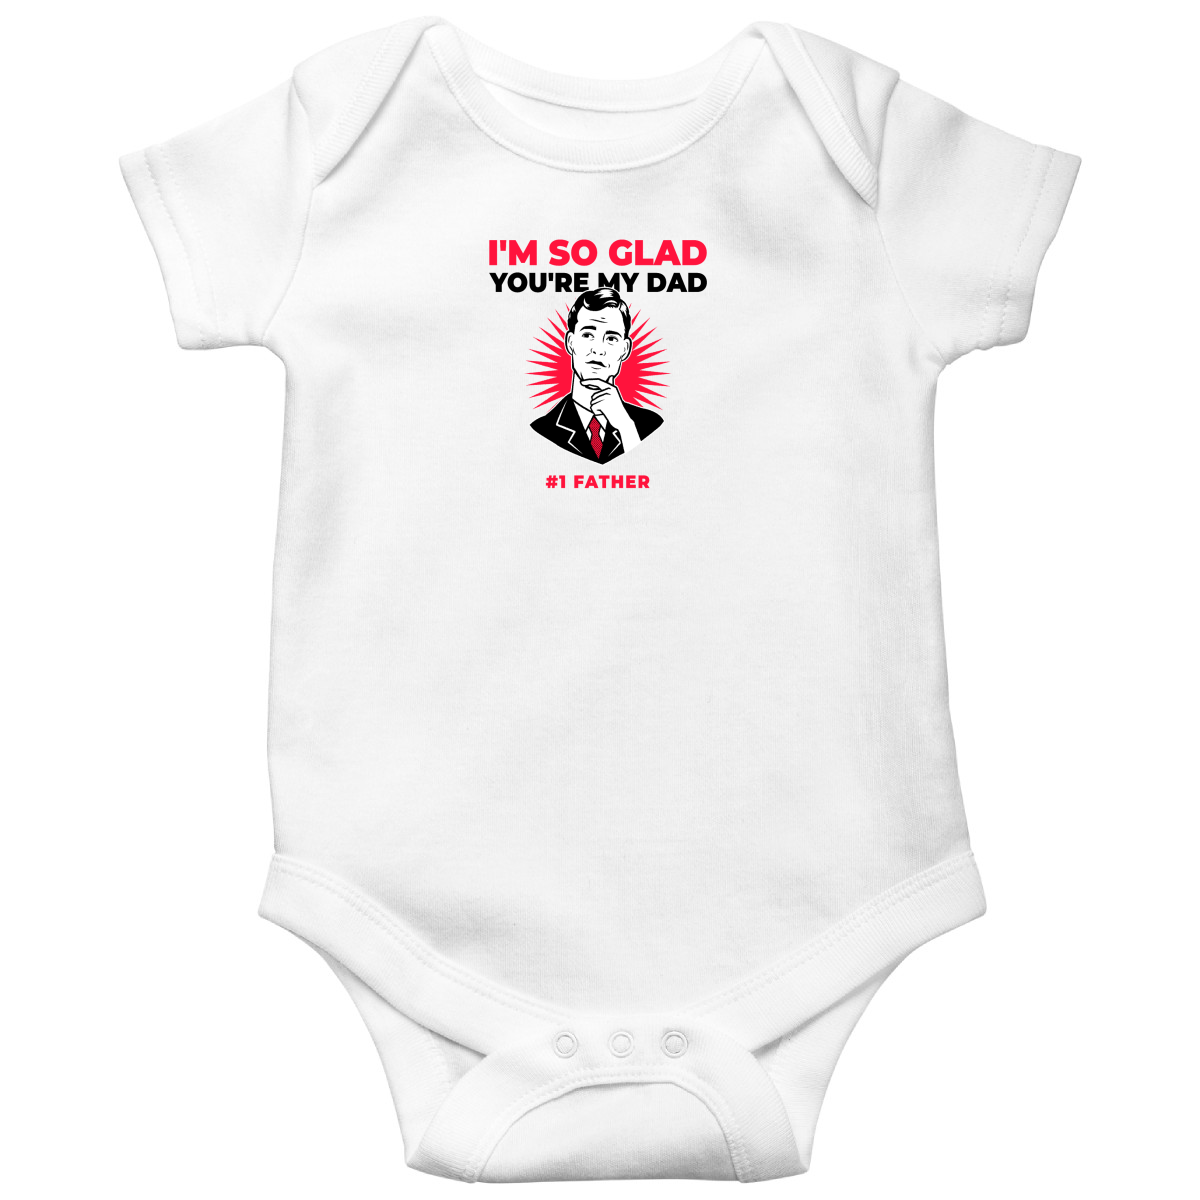 I'm so glad you are my dad Baby Bodysuits | White